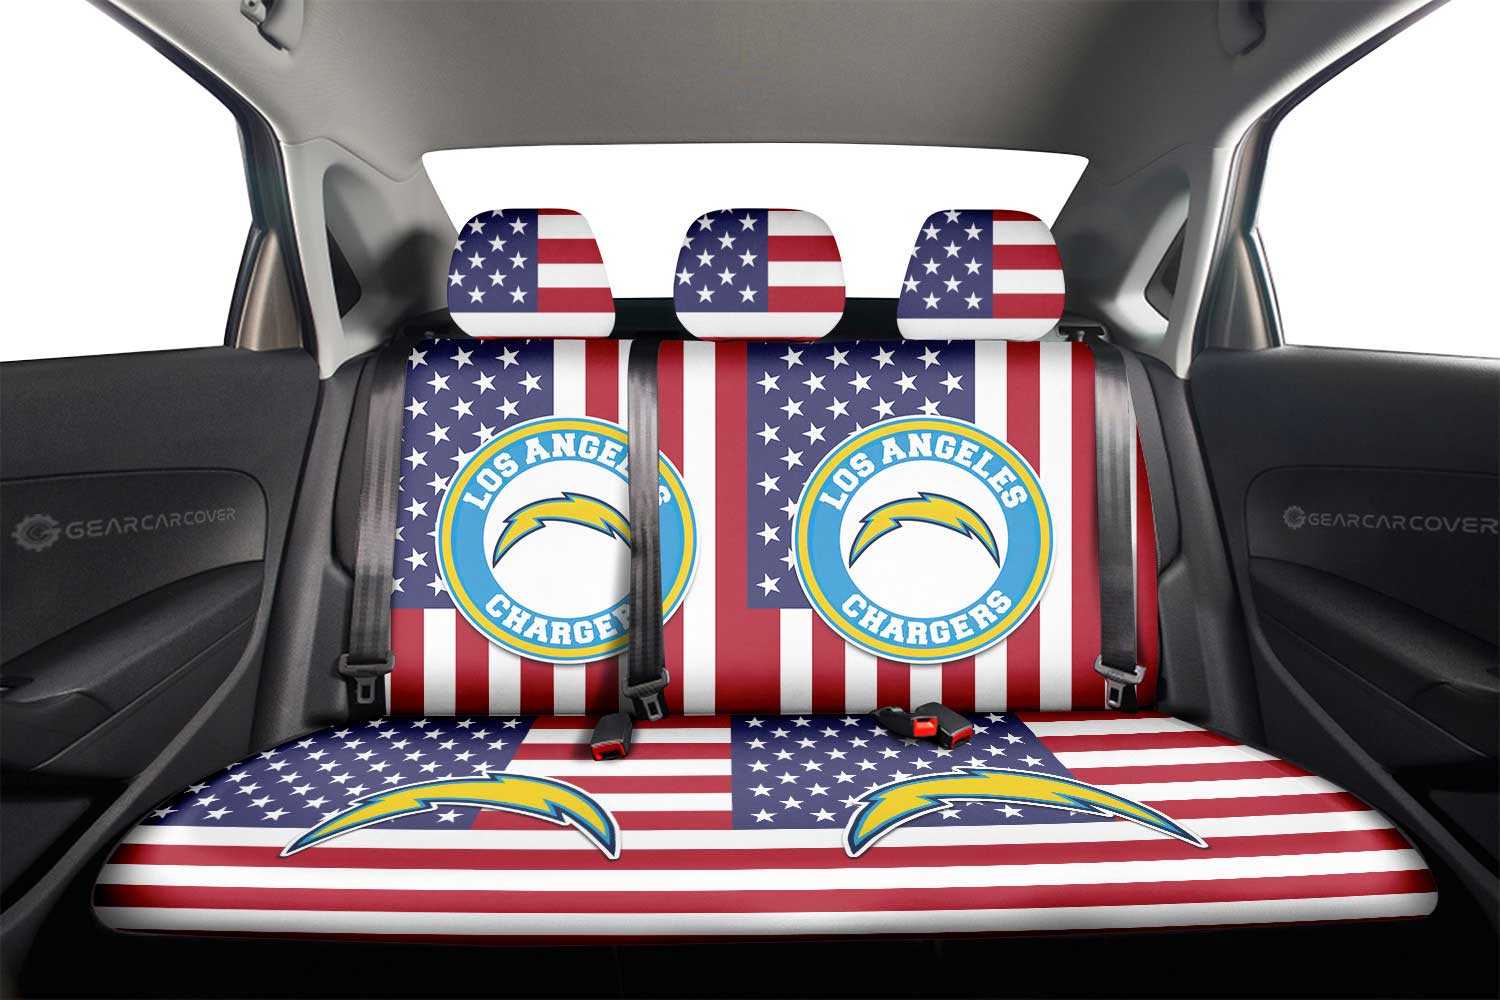 Los Angeles Chargers Car Back Seat Cover Custom Car Accessories - Gearcarcover - 2